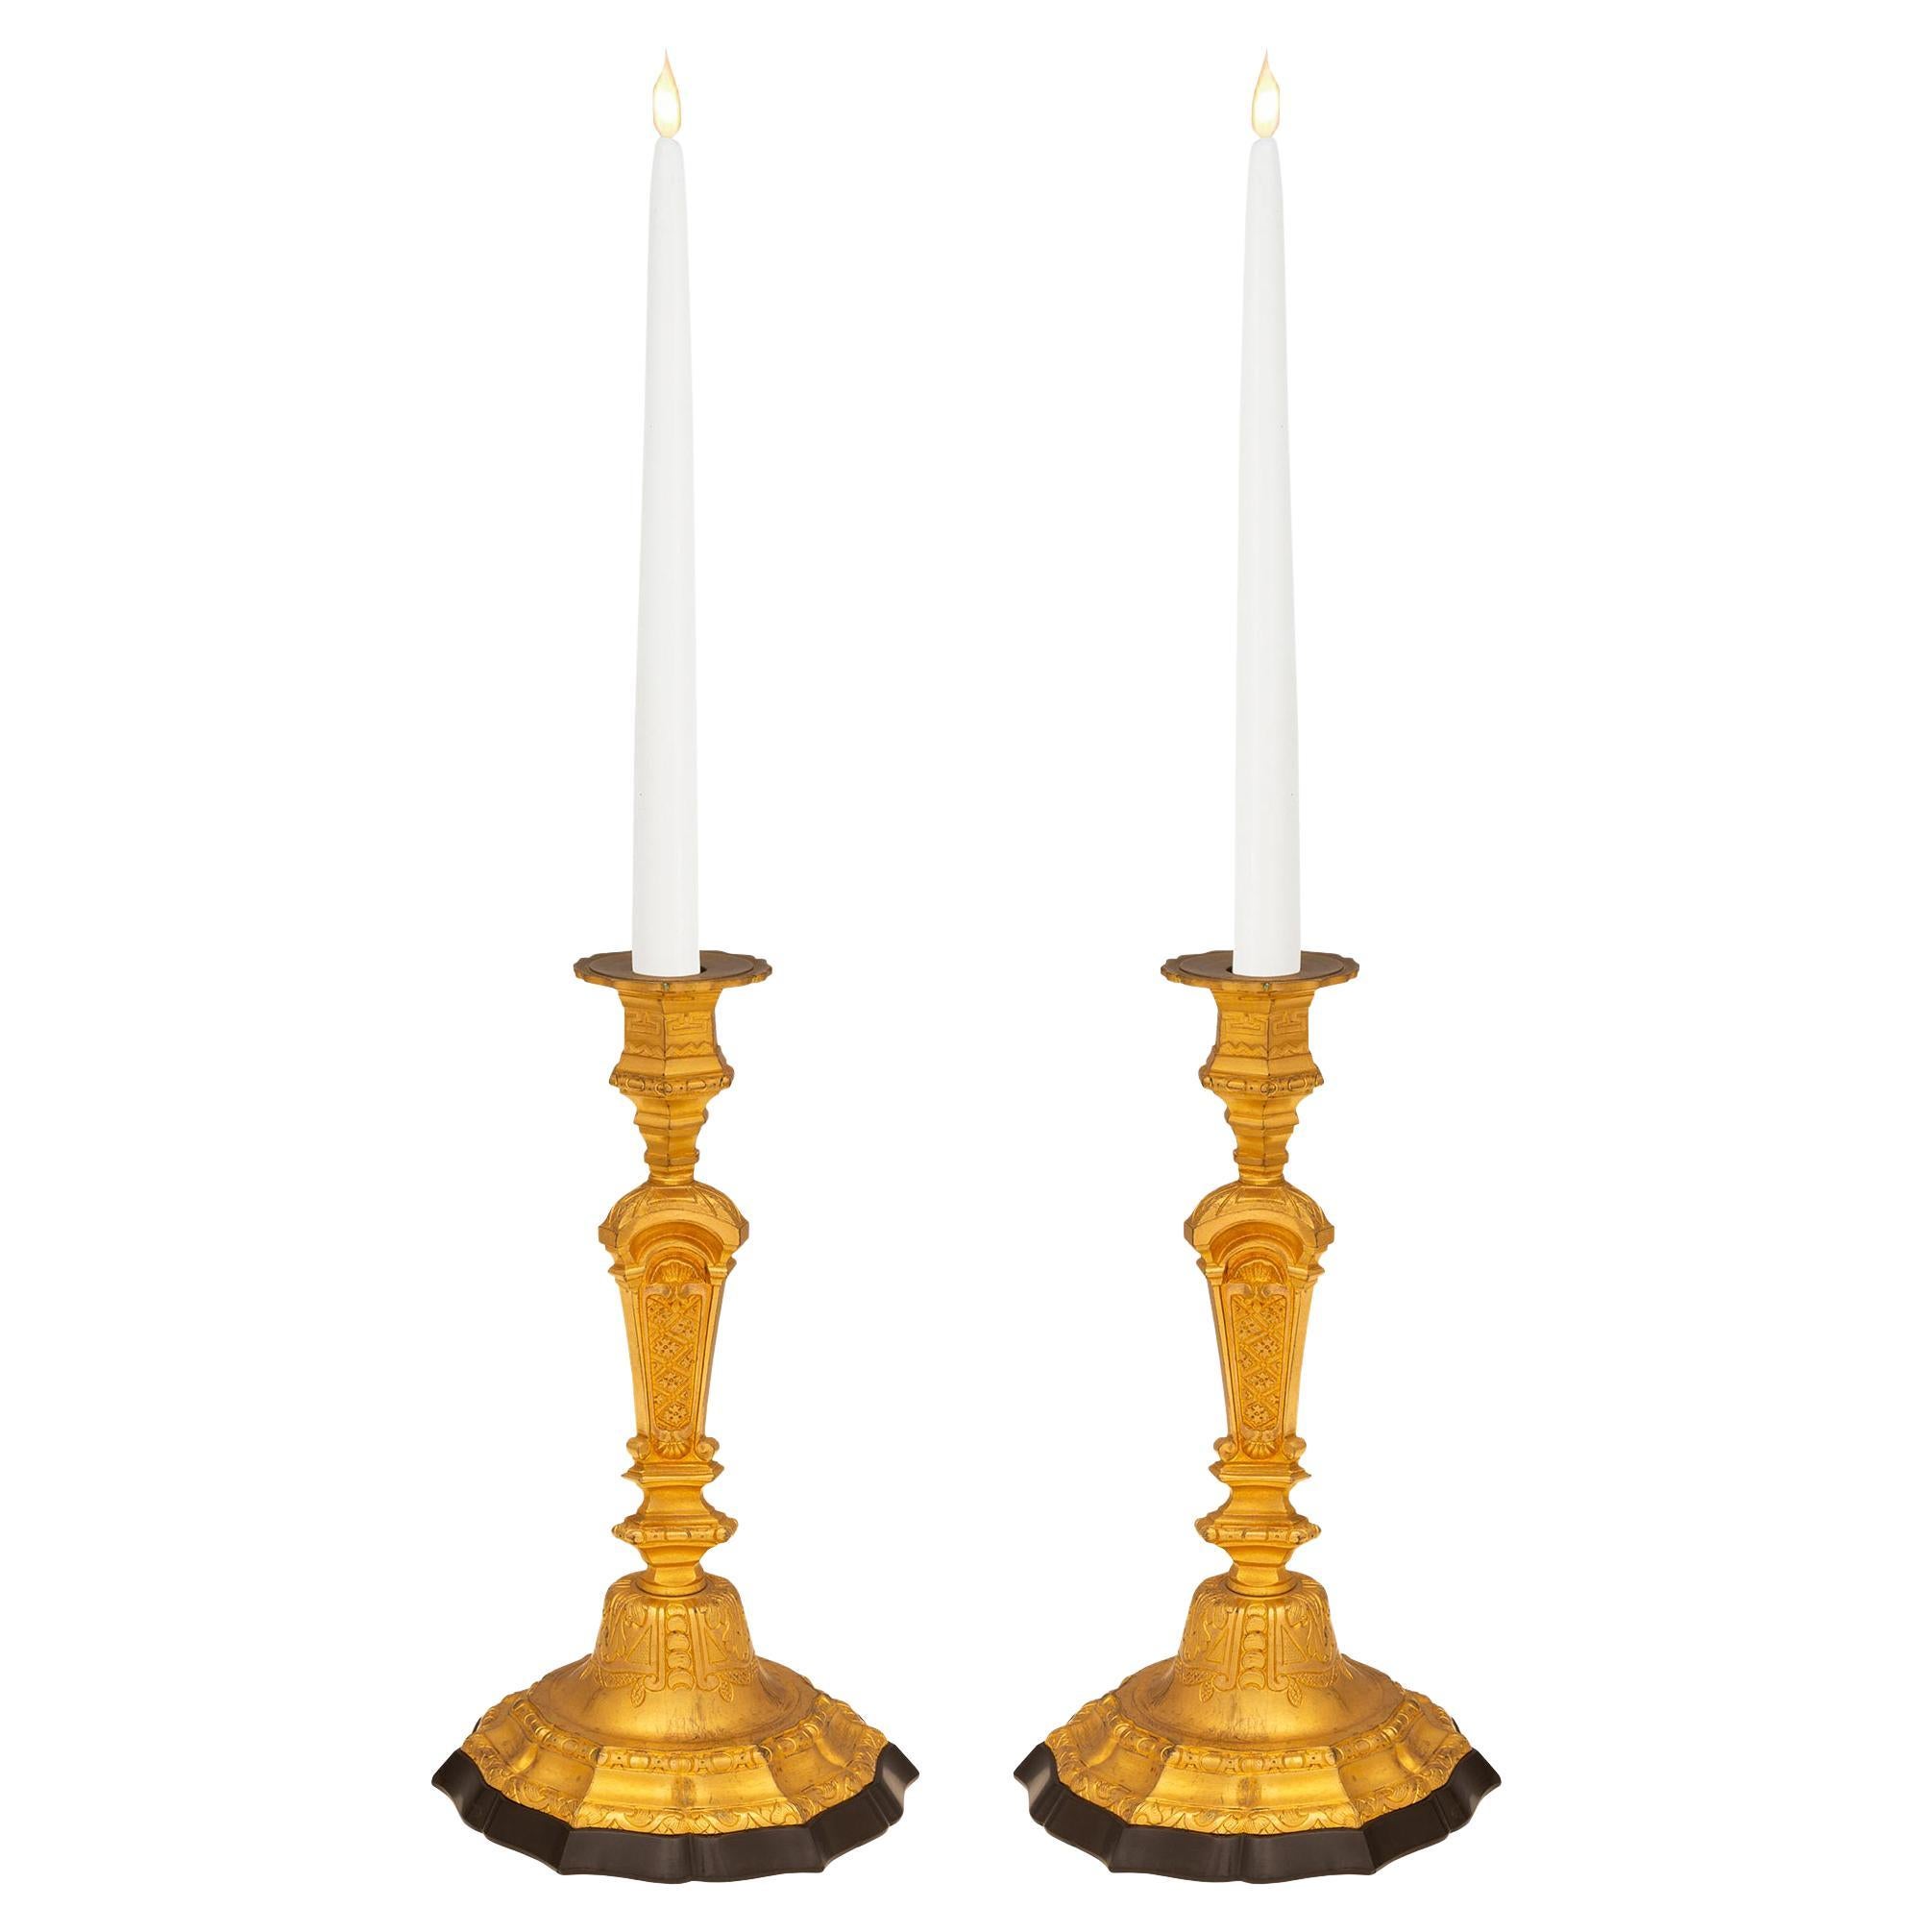 Pair of French 19th Century Louis XIV St. Marble and Ormolu Candlesticks